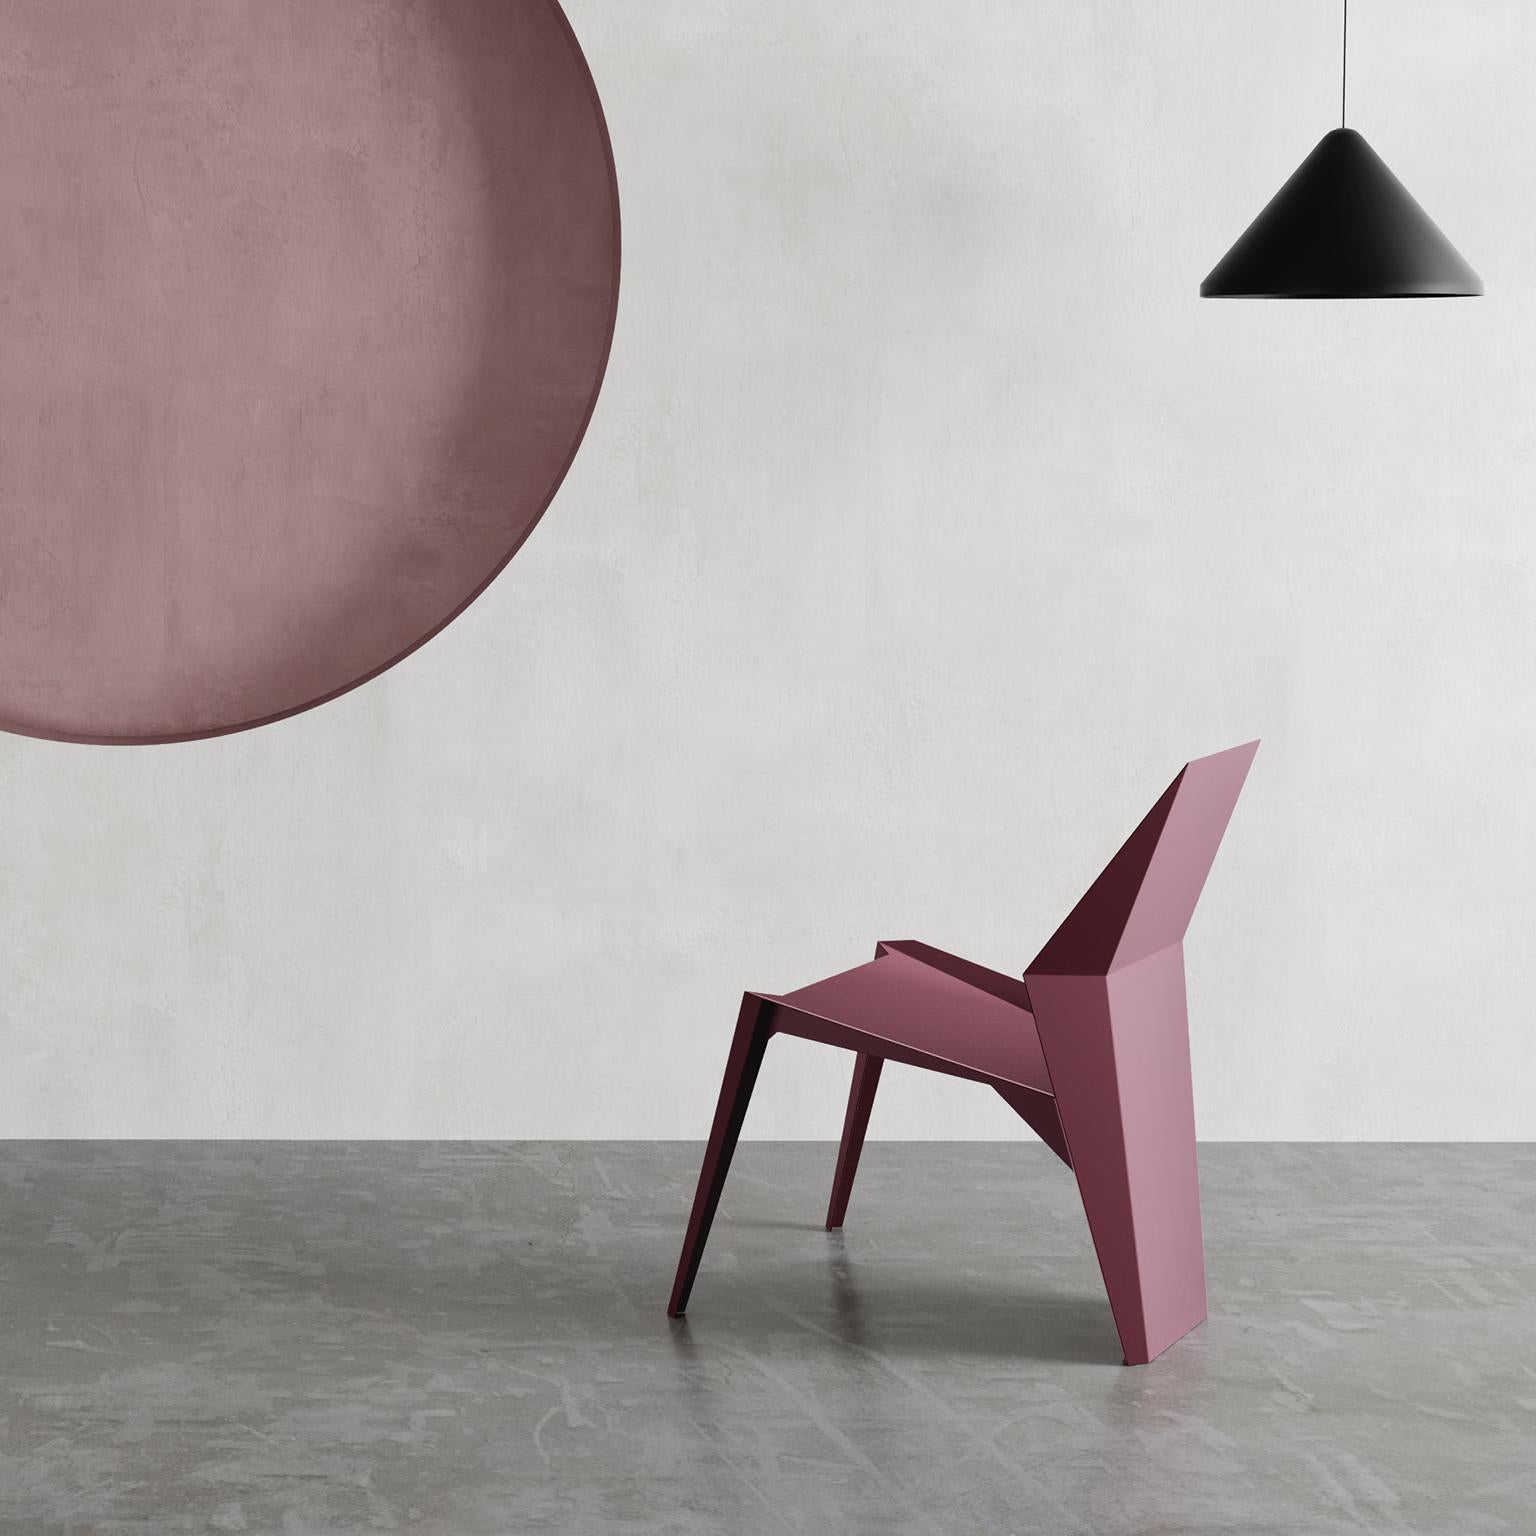 Centaurus Sculptural Chair with soft-touch powder coated finish 4